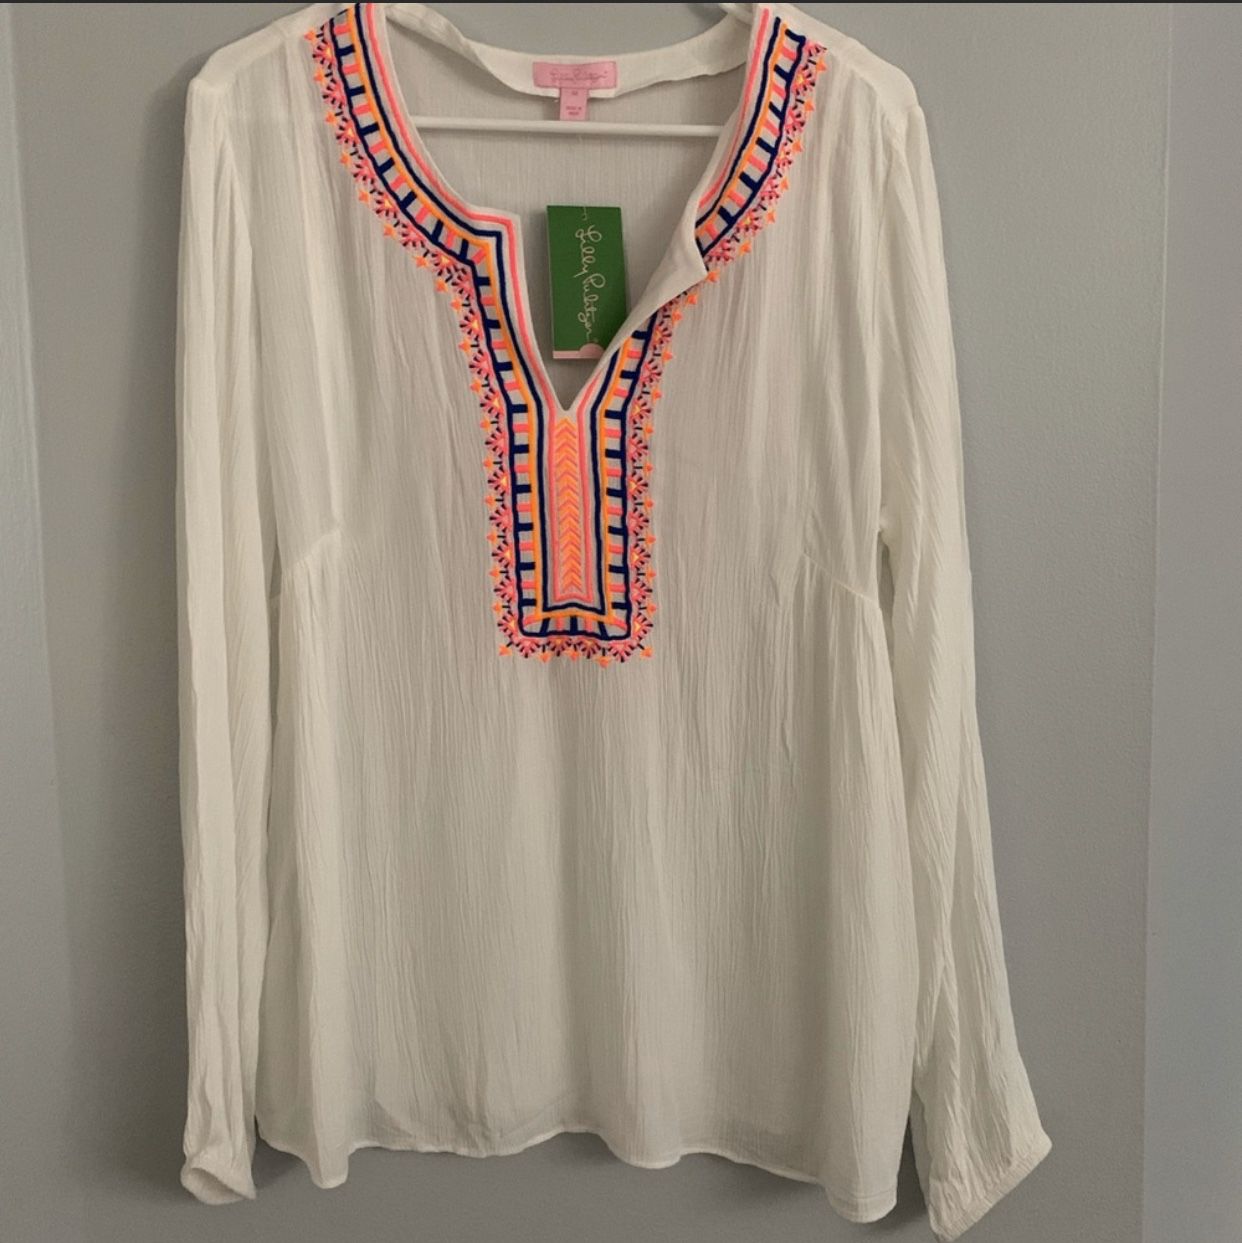 Brand New W/Tags Lily Pulitzer Top!!!